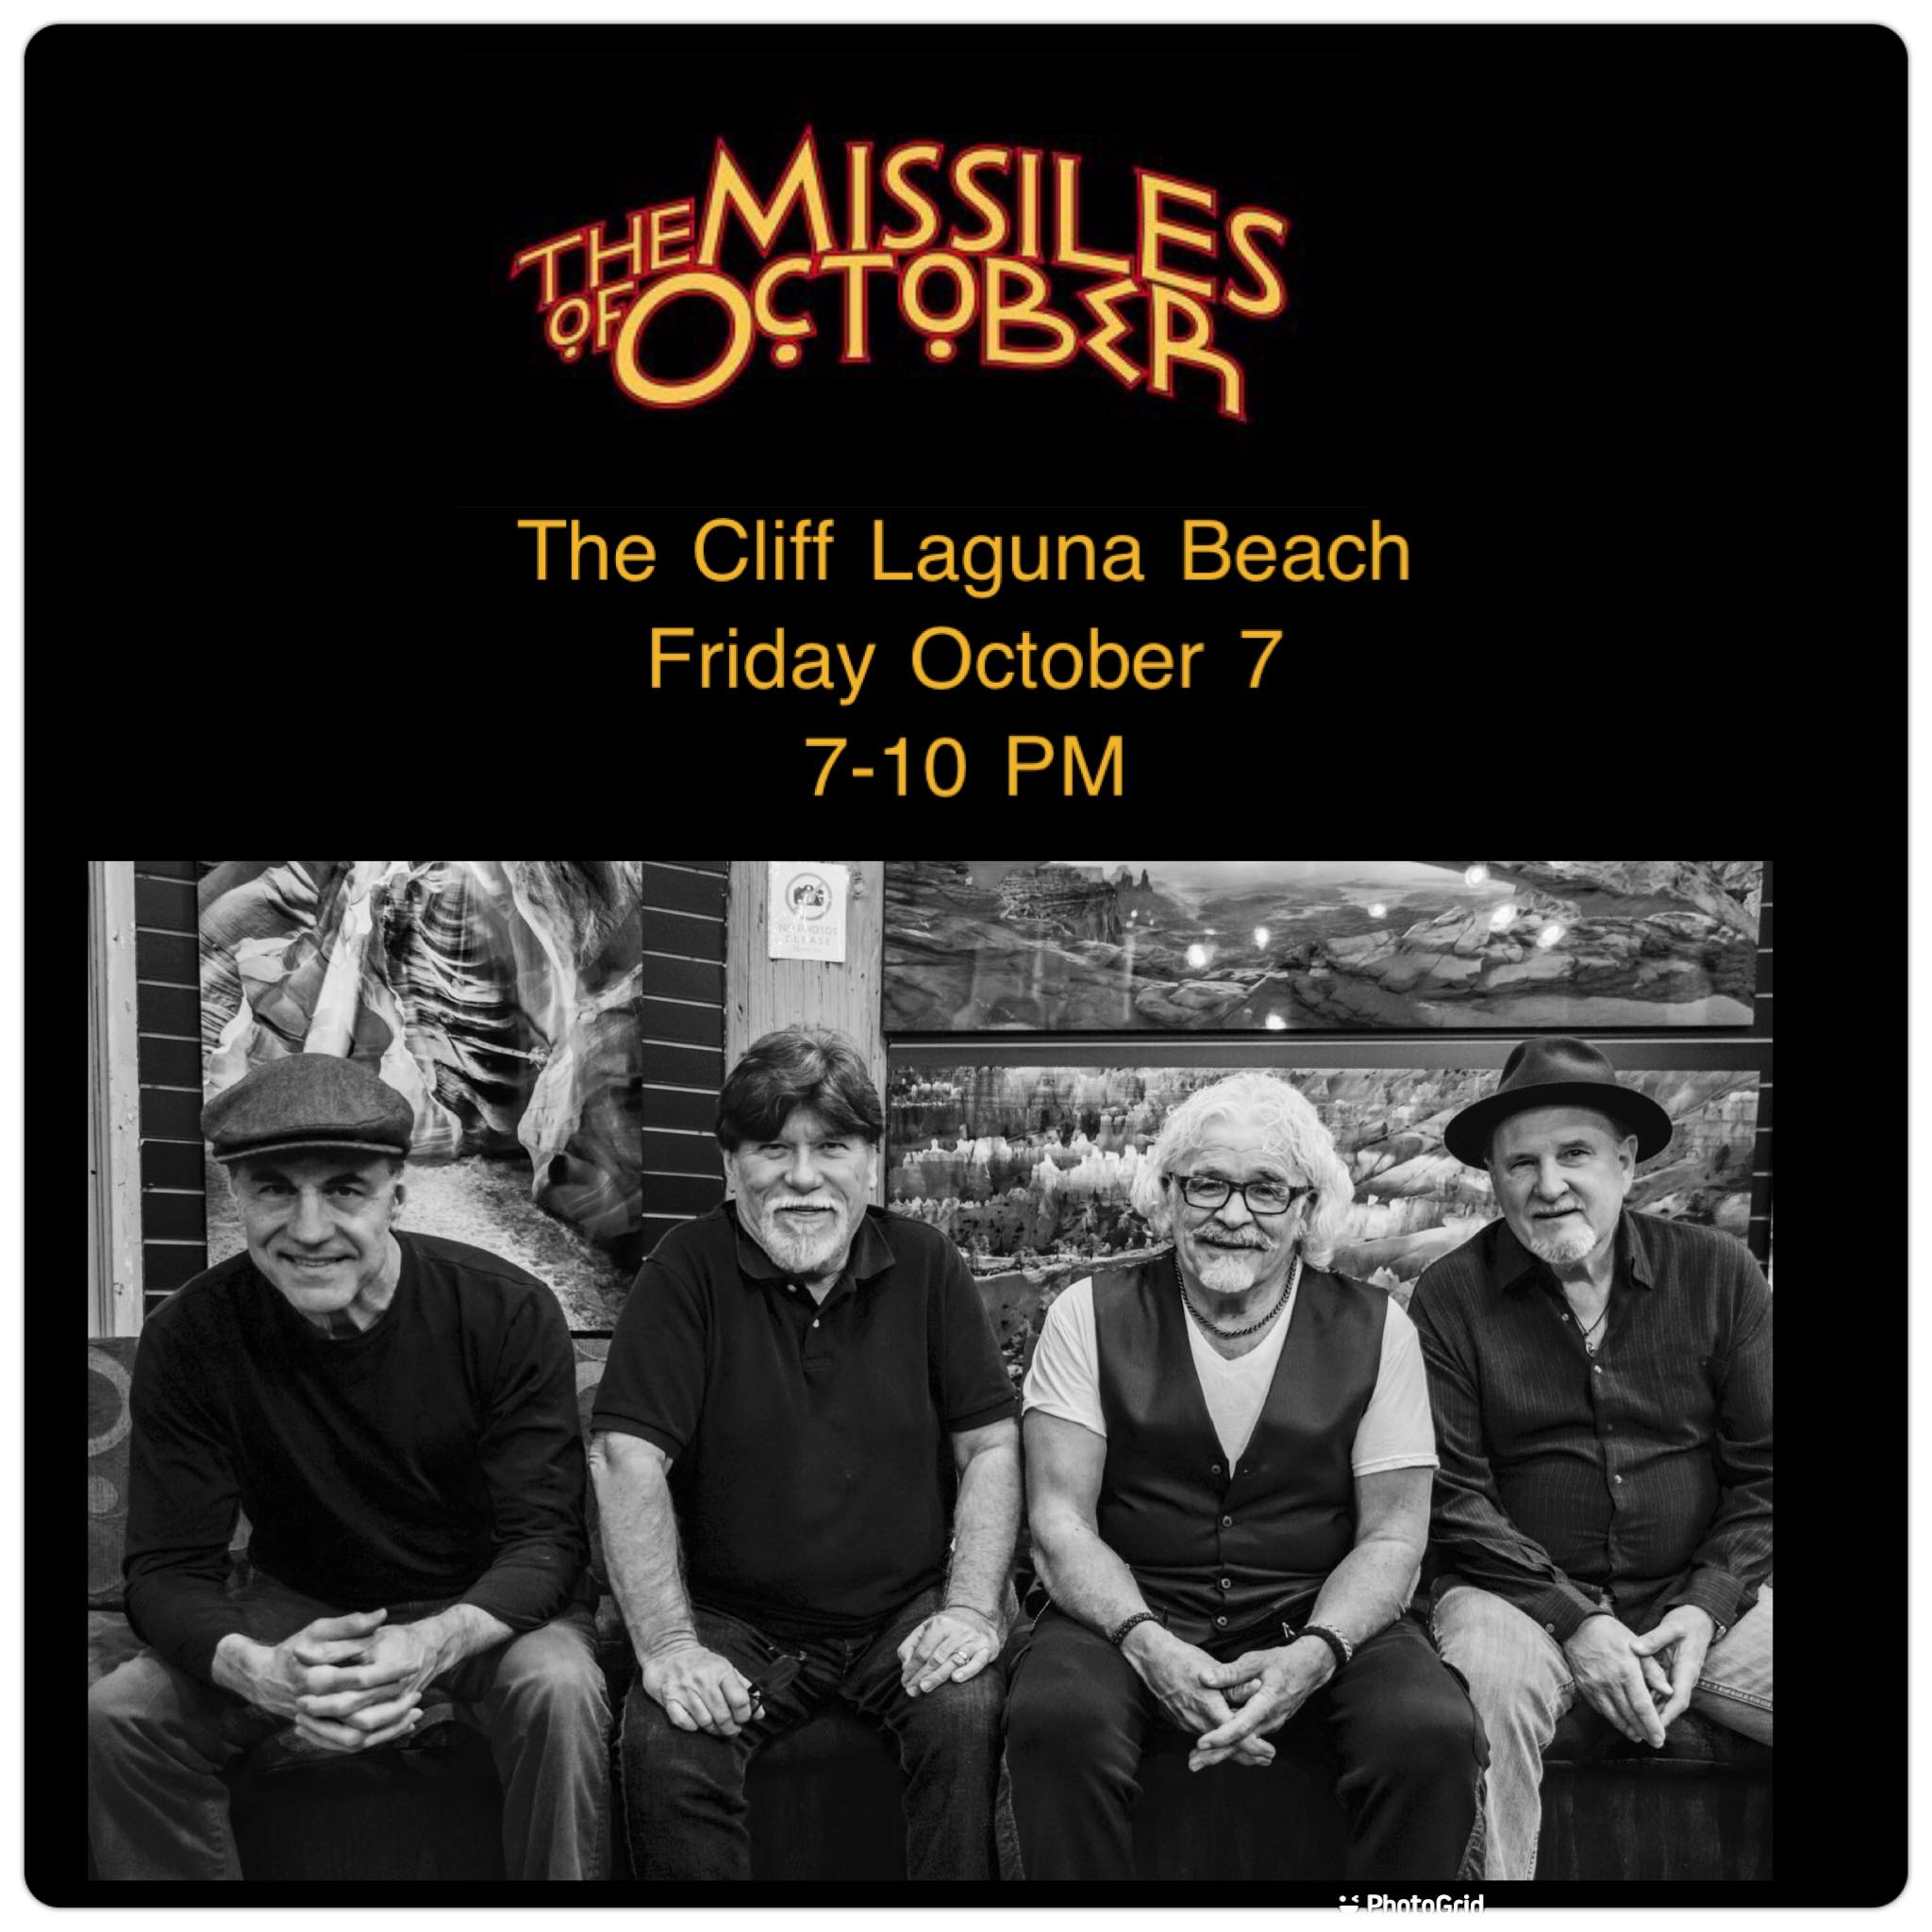 Missiles of October at The Cliff